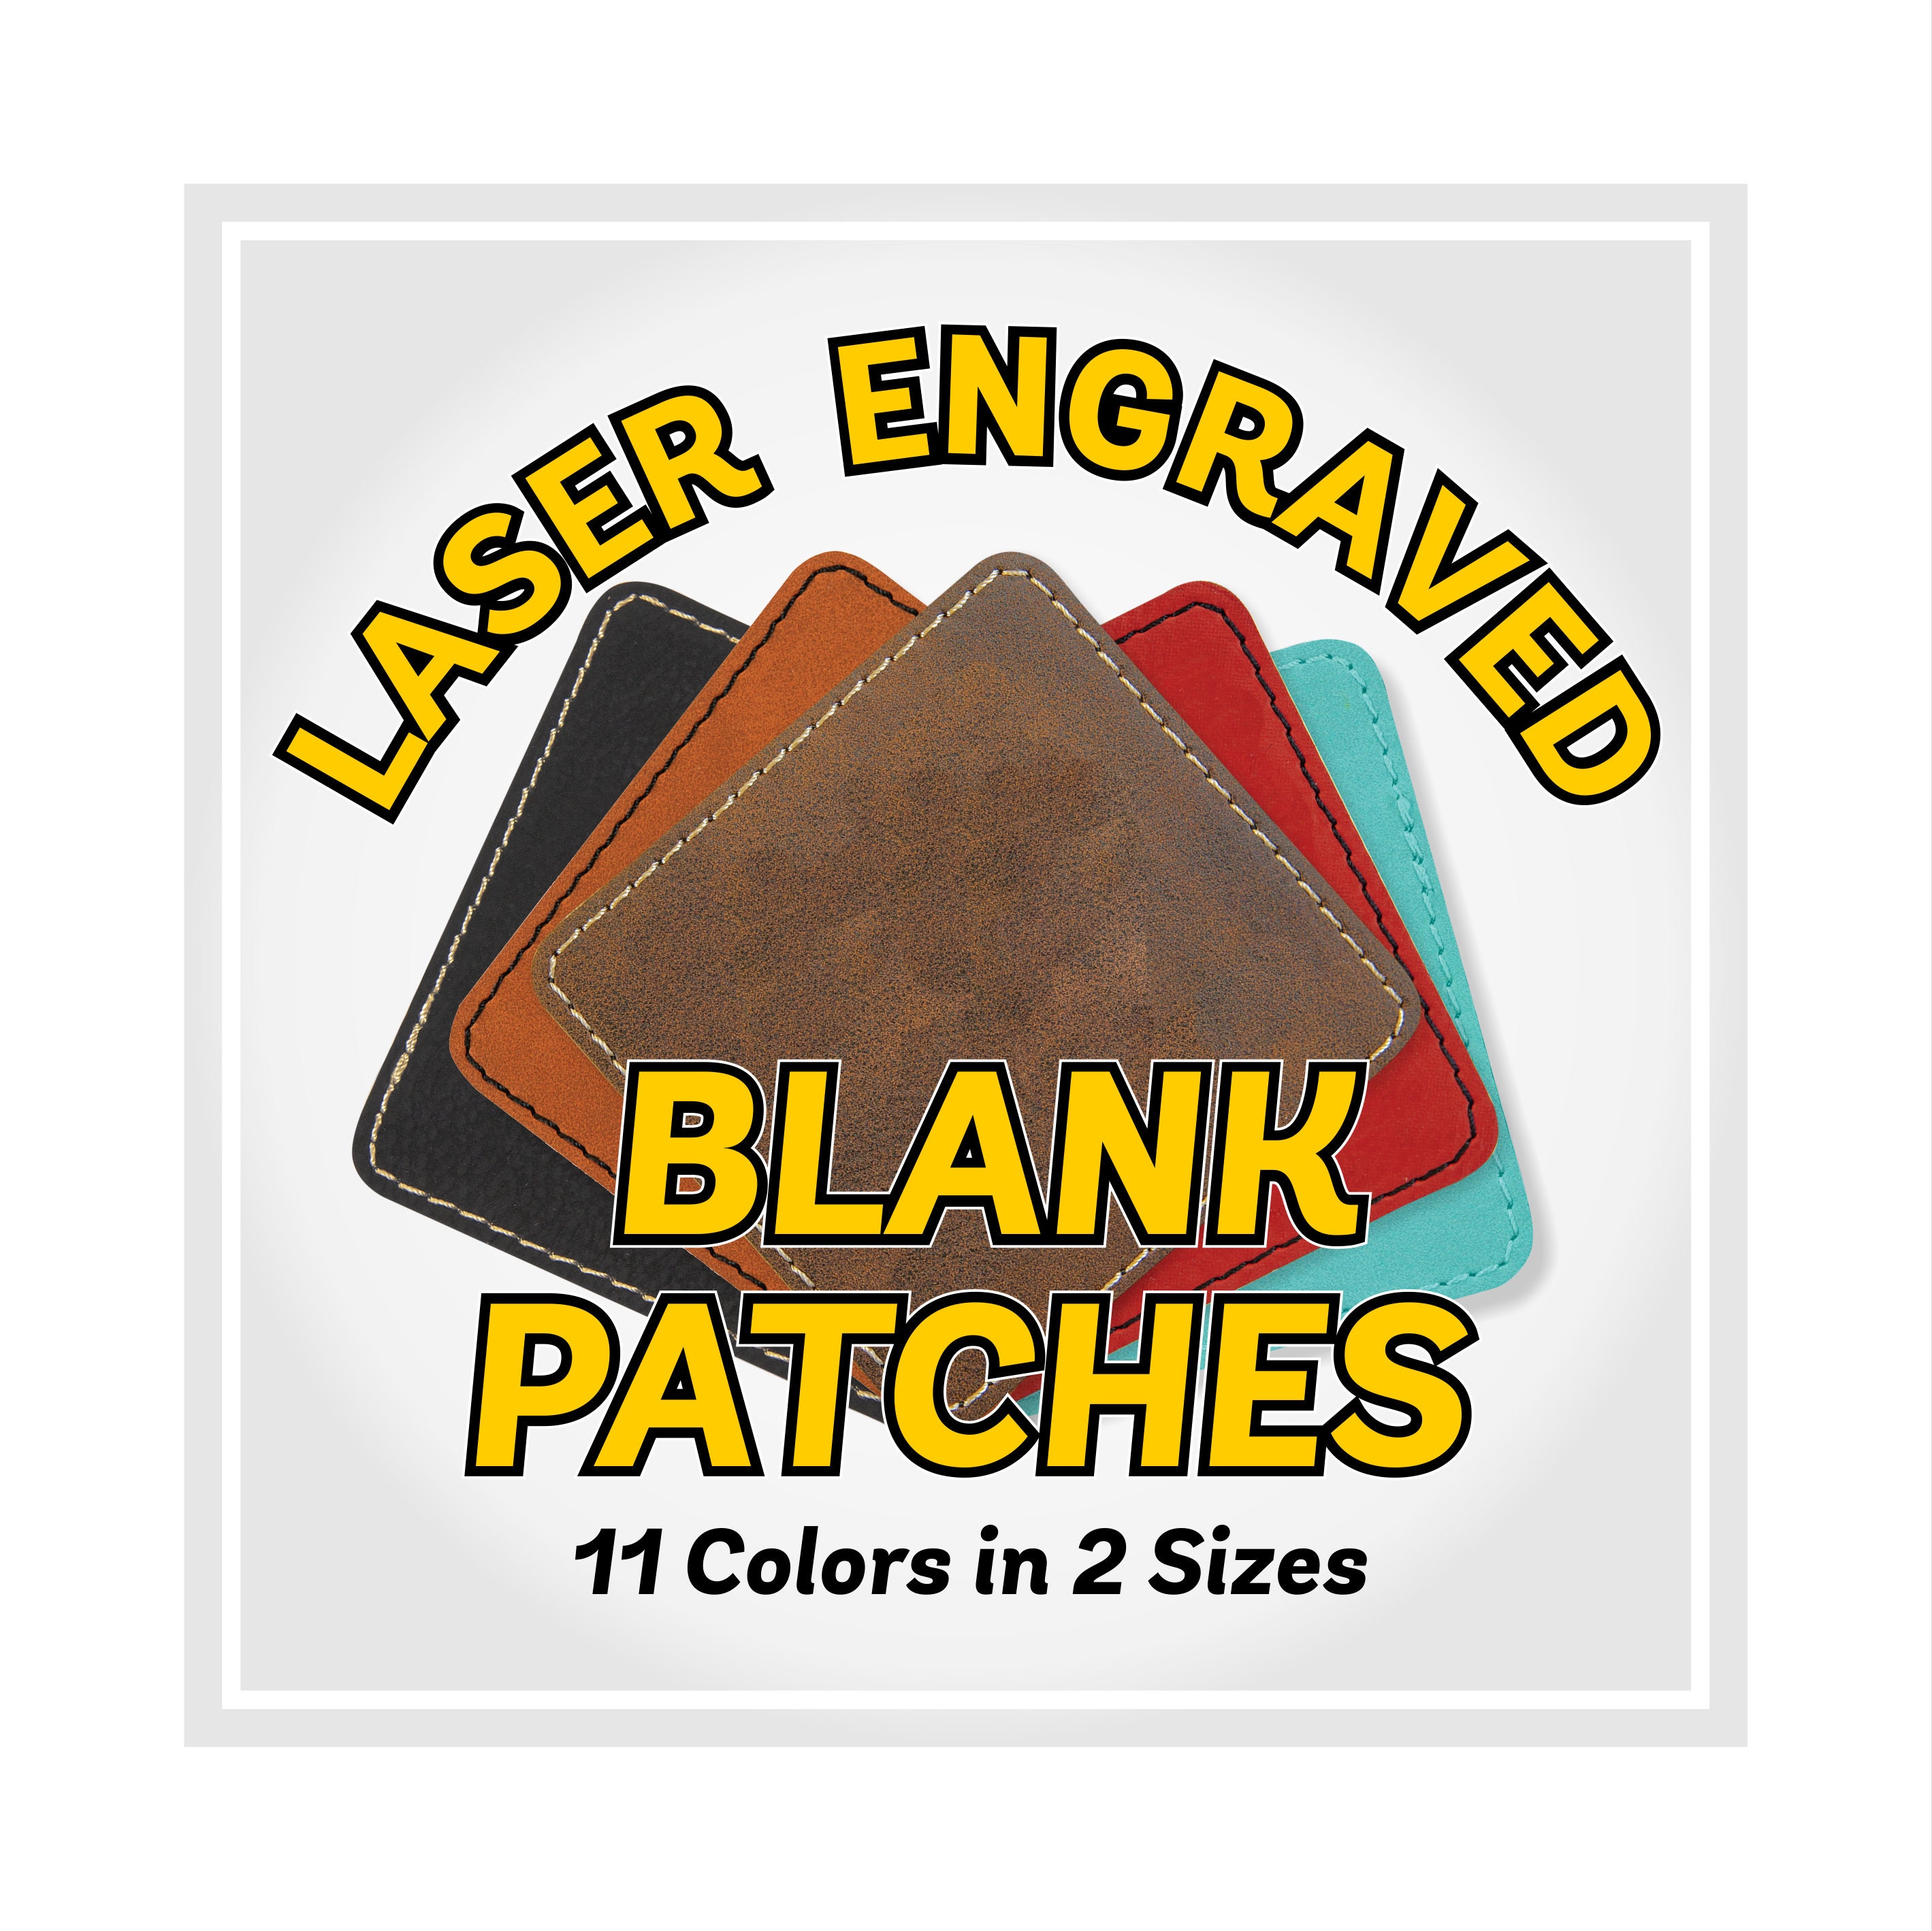 Small Rectangle Laserable Leatherette Patch With Heat Applied